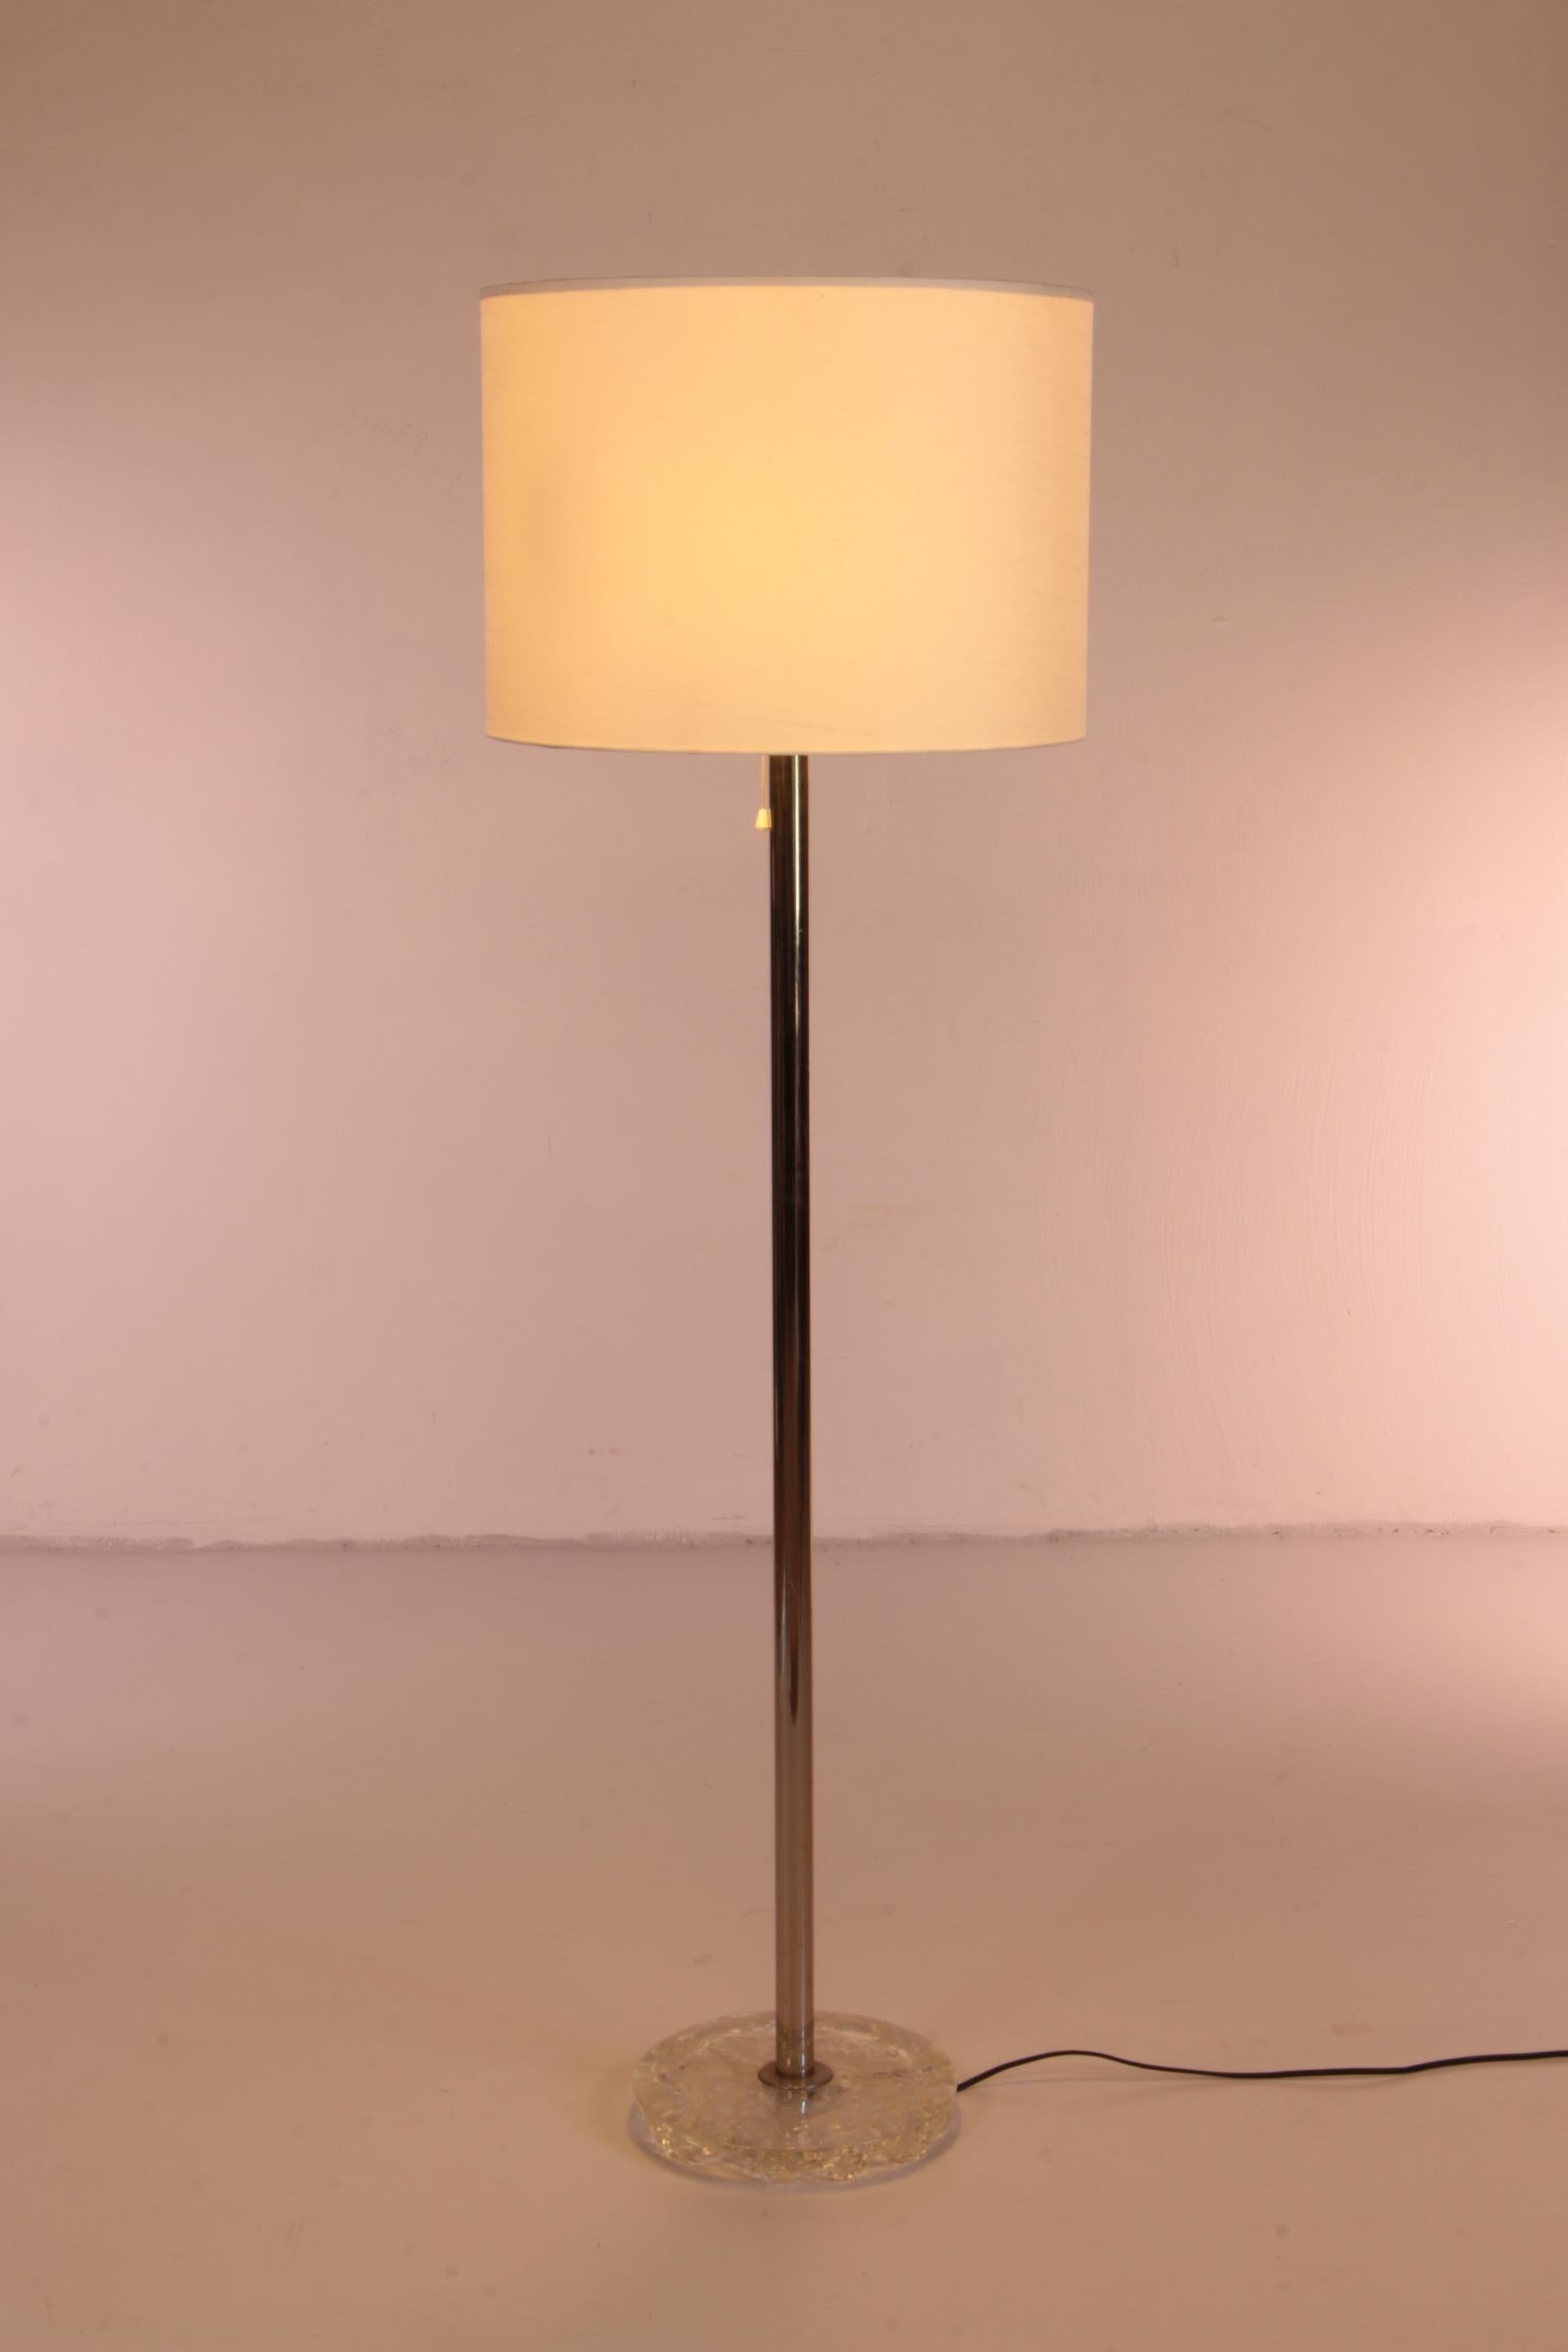 Large Floor Lamp with Chrome Stem and 3 Light Fittings in the Shade by Temde For Sale 8